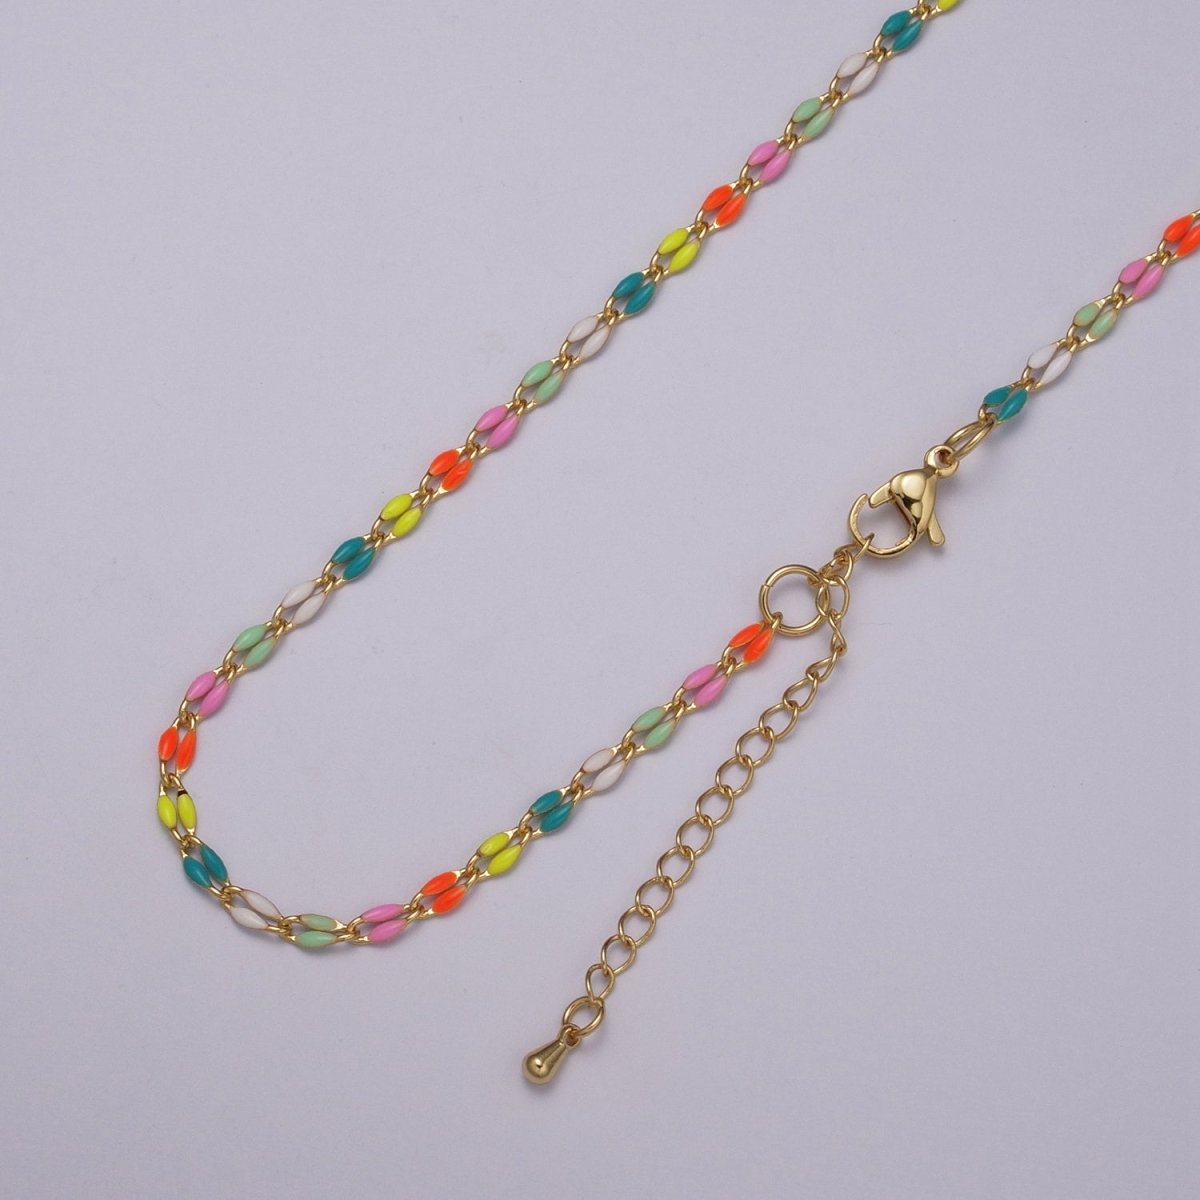 Enamel Gold Filled Colored Chain 2.9mm width Colorful Chain, Chunky Statement Chain Link chain 16, 18 inch + 2 inch extender | WA-337 to WA-358 Clearance Pricing - DLUXCA